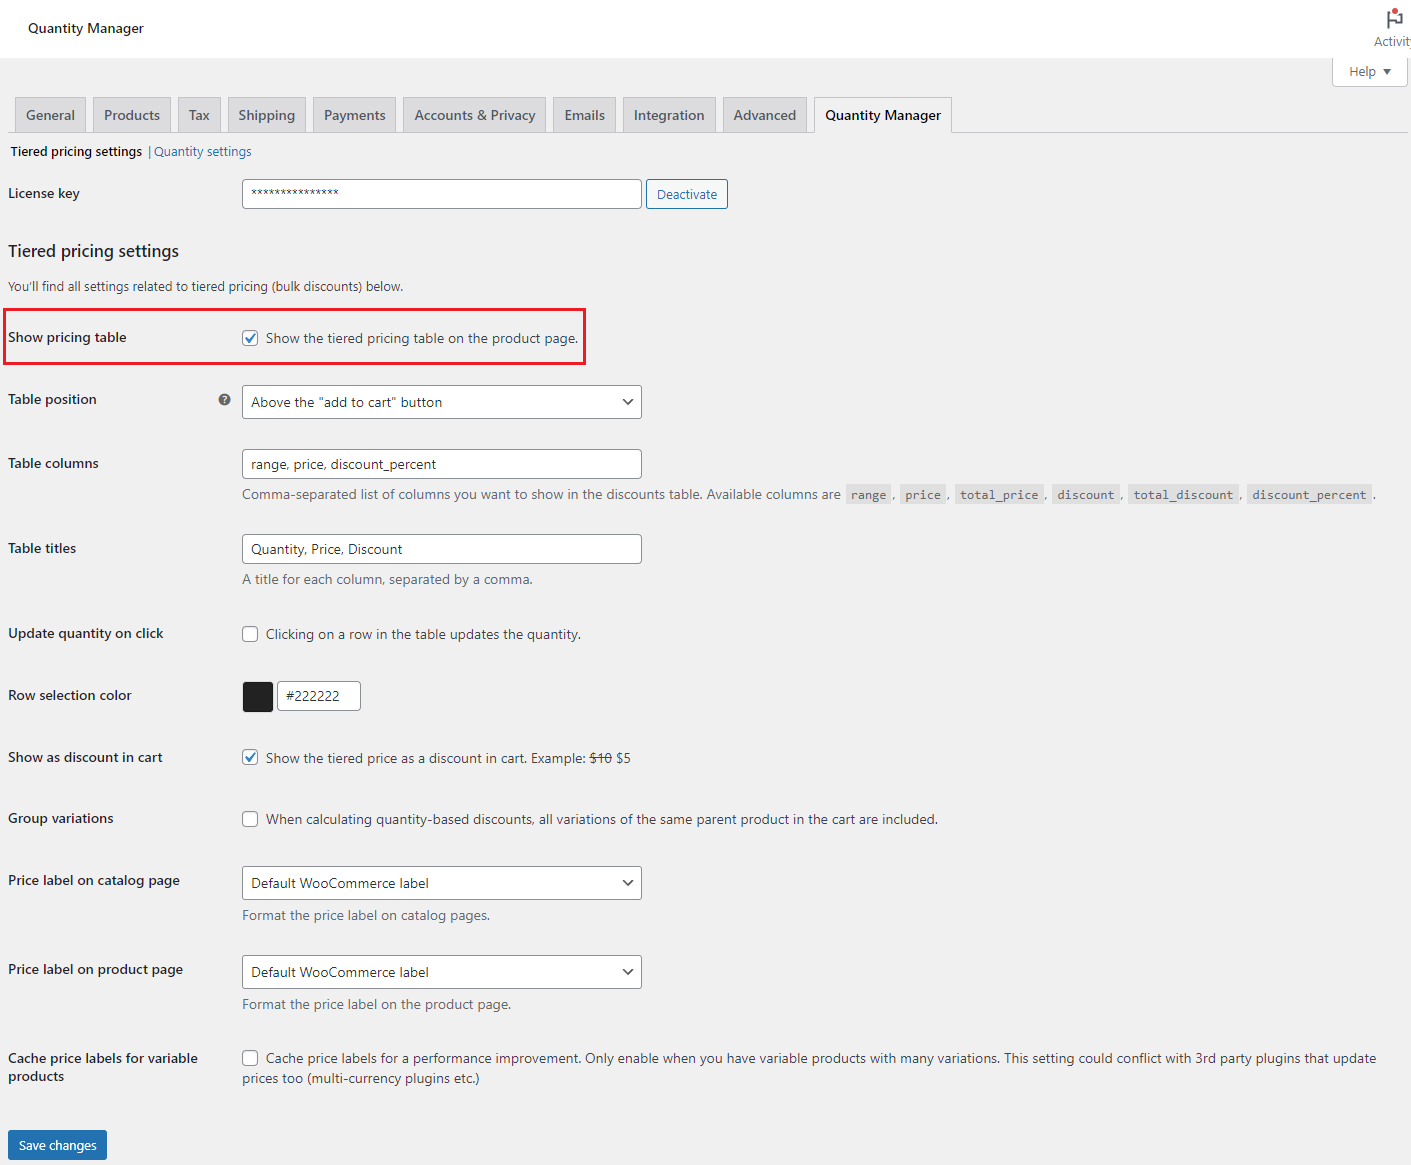 Tiered pricing configuration settings.